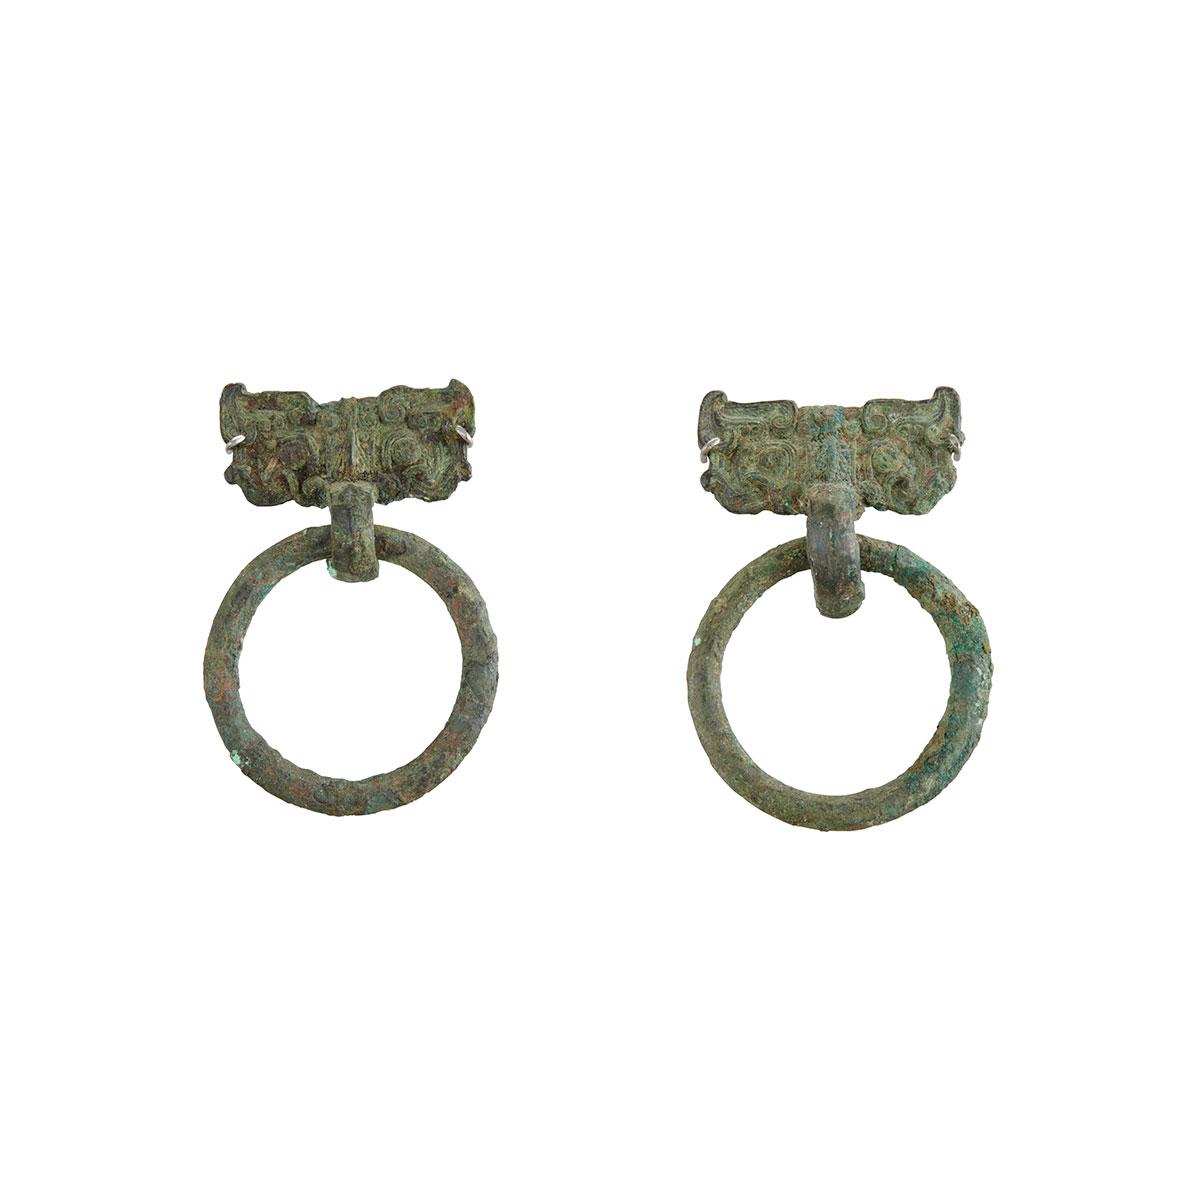 Pair of Bronze Taotie Mask Handles, Warring States Period, 5th to 3rd Century BC